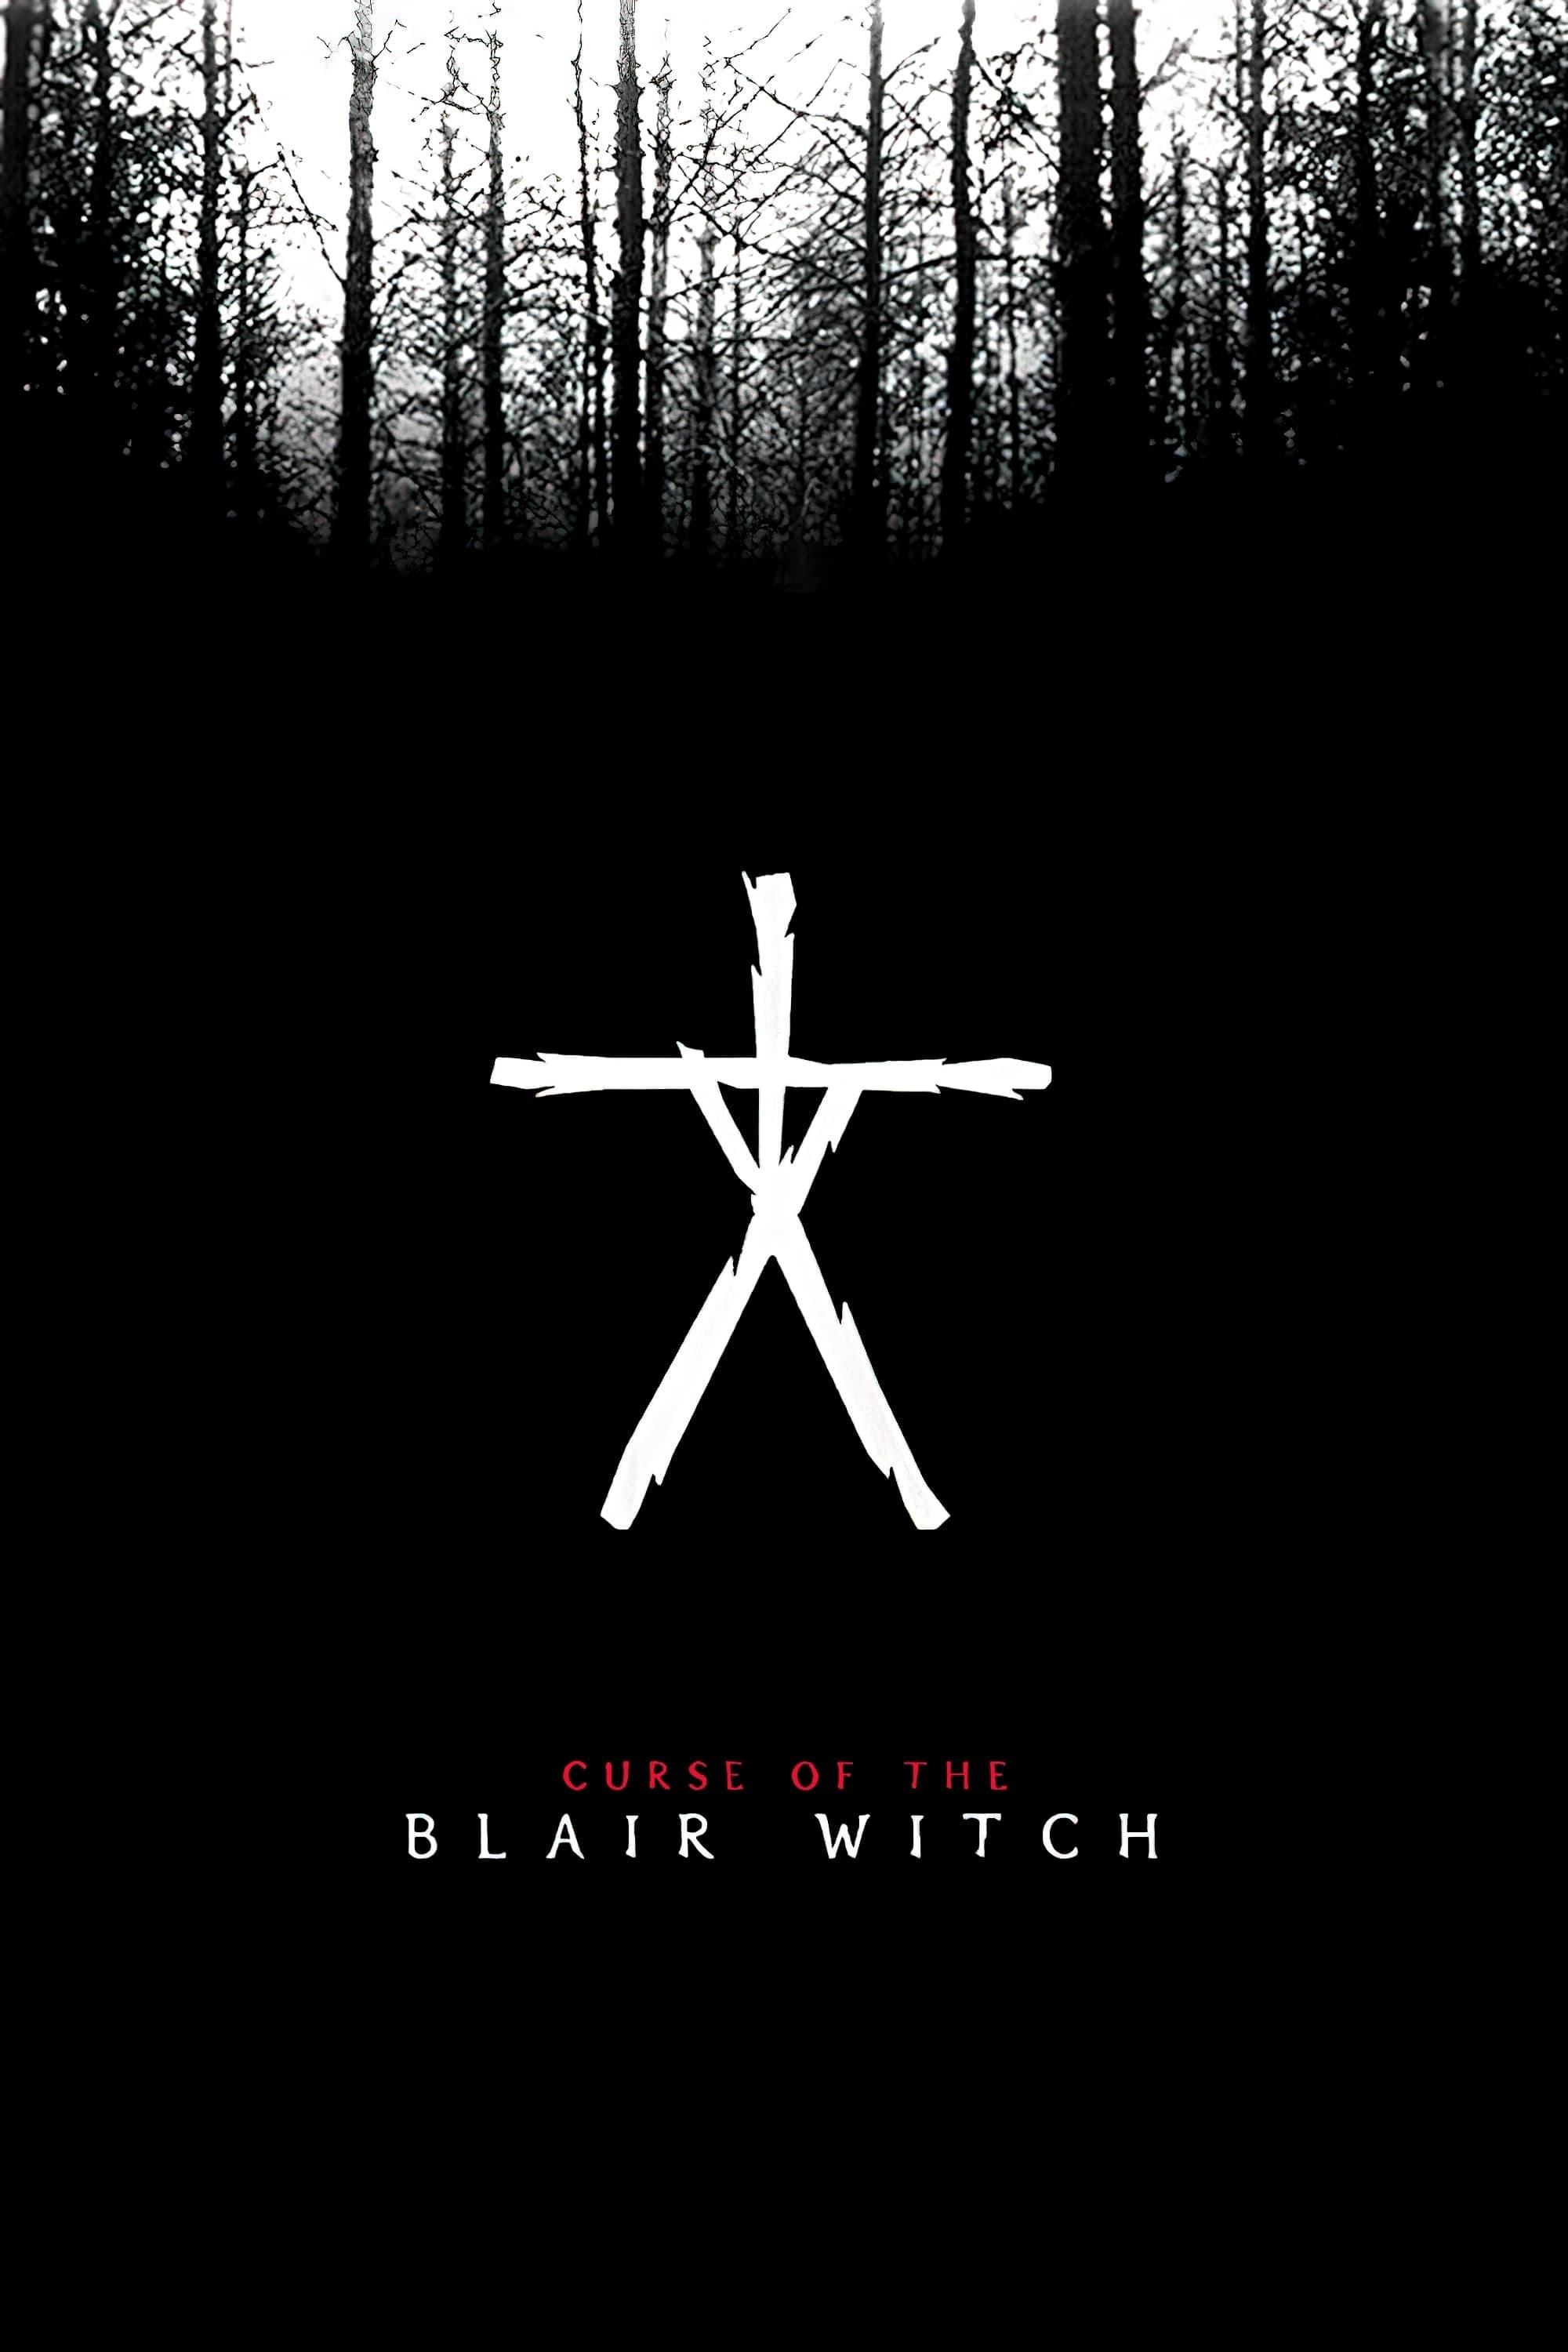 Curse of the Blair Witch poster